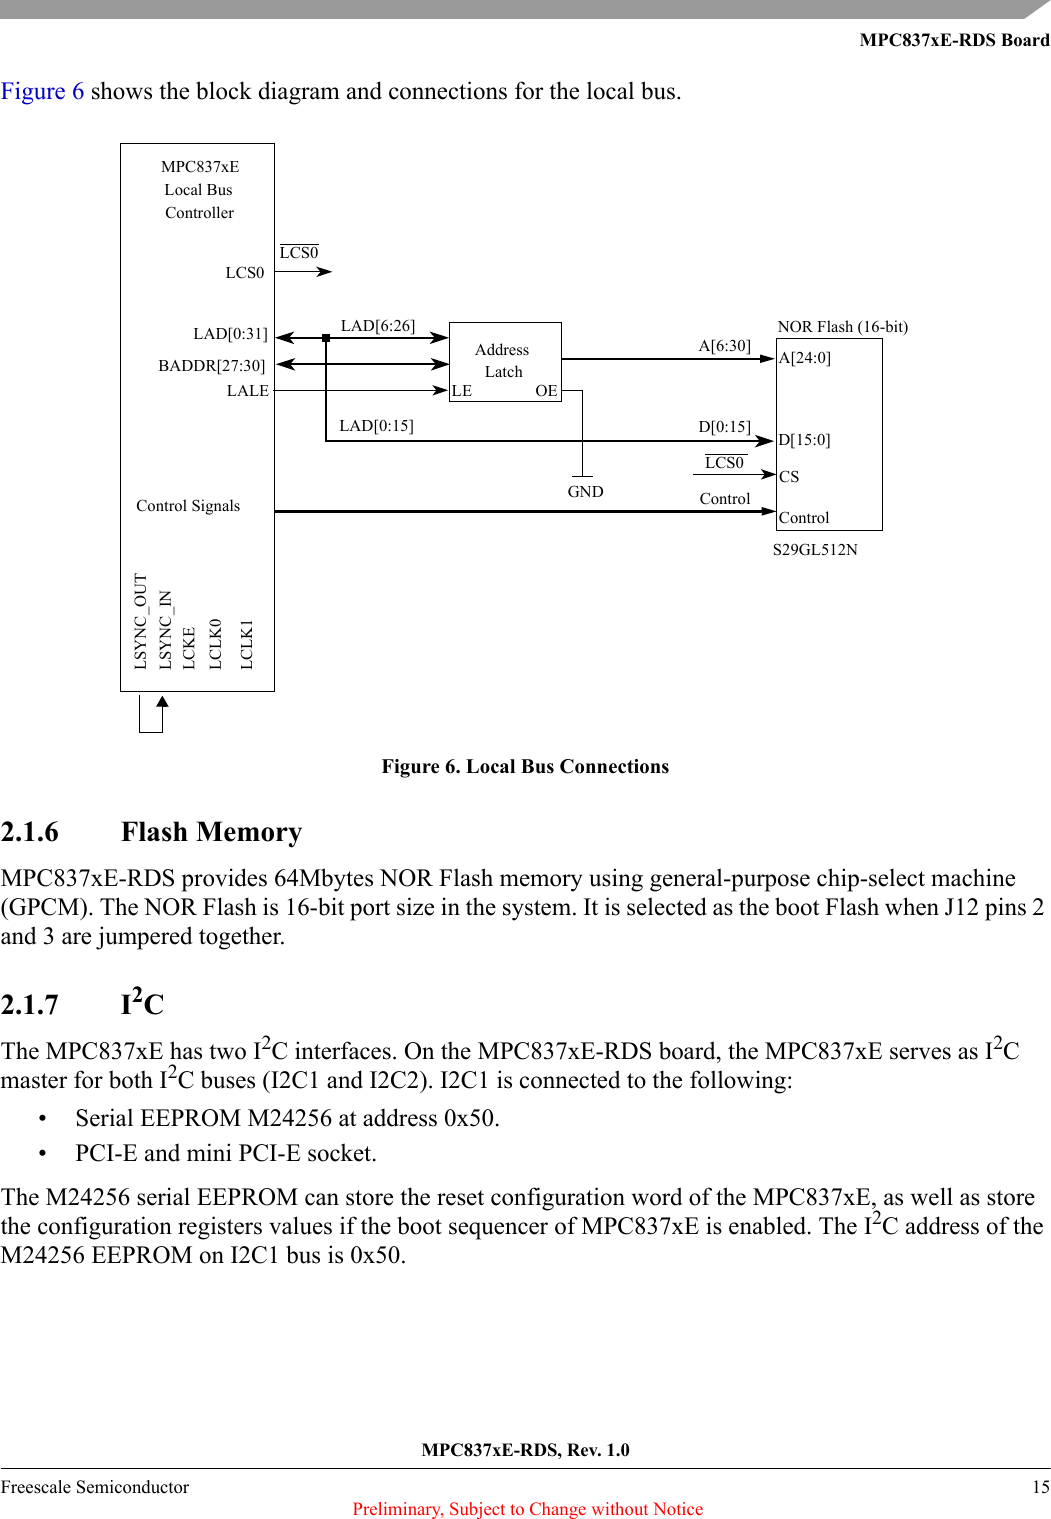 MPC837xE-RDS BoardMPC837xE-RDS, Rev. 1.0Freescale Semiconductor 15 Preliminary, Subject to Change without NoticeFigure 6 shows the block diagram and connections for the local bus.Figure 6. Local Bus Connections2.1.6 Flash MemoryMPC837xE-RDS provides 64Mbytes NOR Flash memory using general-purpose chip-select machine (GPCM). The NOR Flash is 16-bit port size in the system. It is selected as the boot Flash when J12 pins 2 and 3 are jumpered together.2.1.7 I2CThe MPC837xE has two I2C interfaces. On the MPC837xE-RDS board, the MPC837xE serves as I2C master for both I2C buses (I2C1 and I2C2). I2C1 is connected to the following:• Serial EEPROM M24256 at address 0x50.• PCI-E and mini PCI-E socket.The M24256 serial EEPROM can store the reset configuration word of the MPC837xE, as well as store the configuration registers values if the boot sequencer of MPC837xE is enabled. The I2C address of the M24256 EEPROM on I2C1 bus is 0x50.A[24:0]CSS29GL512NNOR Flash (16-bit)MPC837xELAD[0:31]BADDR[27:30]D[15:0]LALEAddressLE Local Bus LCS0ControlOED[0:15]A[6:30]LCS0 LatchLCS0ControlLAD[6:26]LAD[0:15]Controller GNDControl SignalsLSYNC_OUTLSYNC_INLCKELCLK0LCLK1